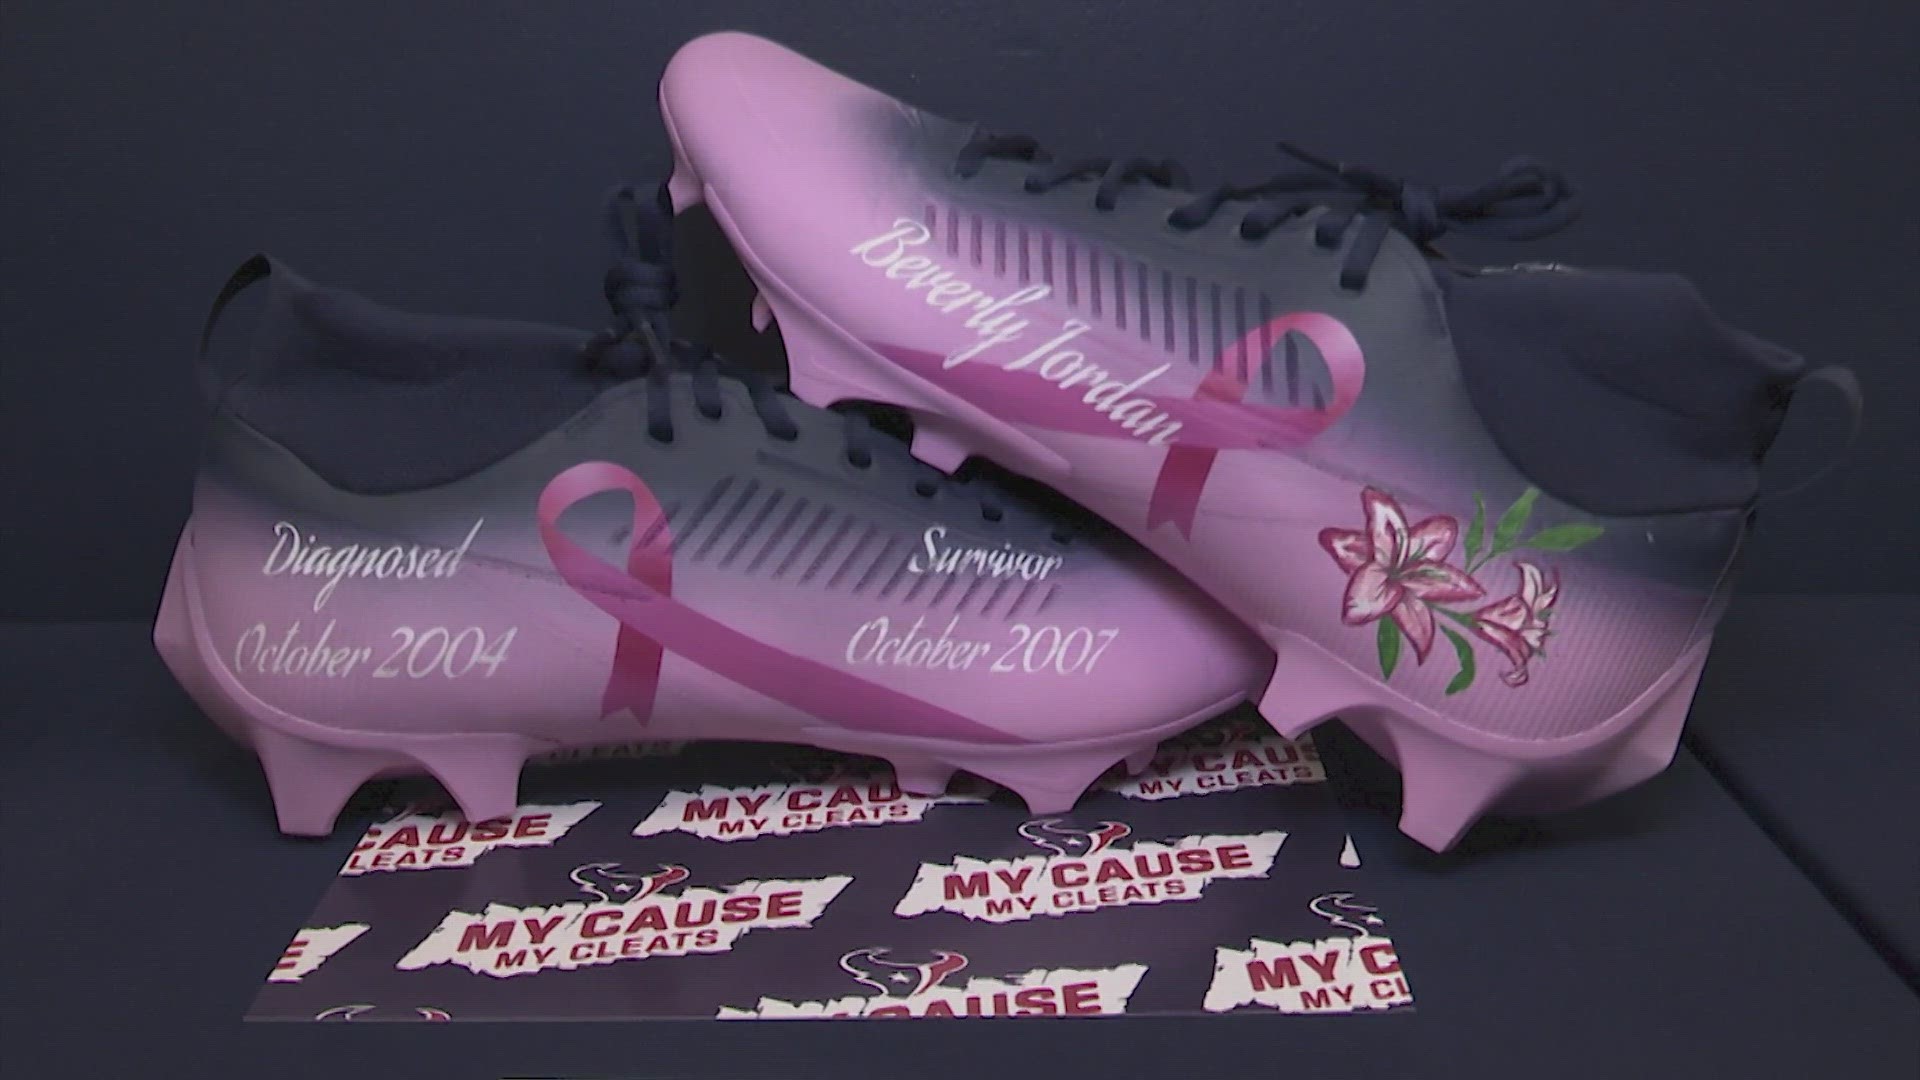 NFL players, including the Houston Texans, will wear specially designed cleats this weekend to represent causes they support.